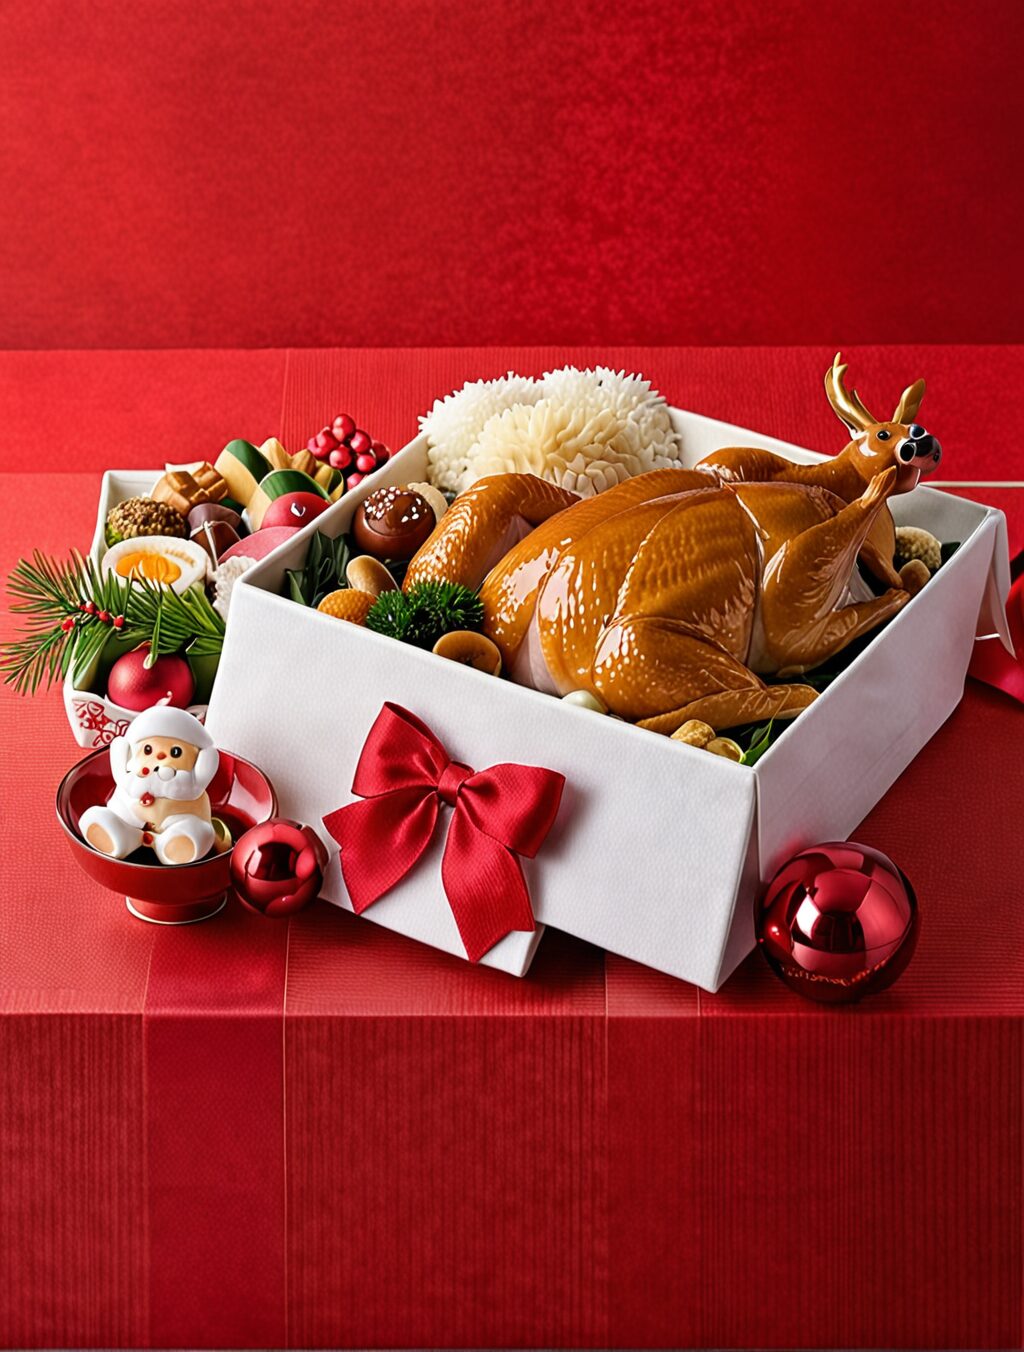 what do many people in japan eat on christmas day